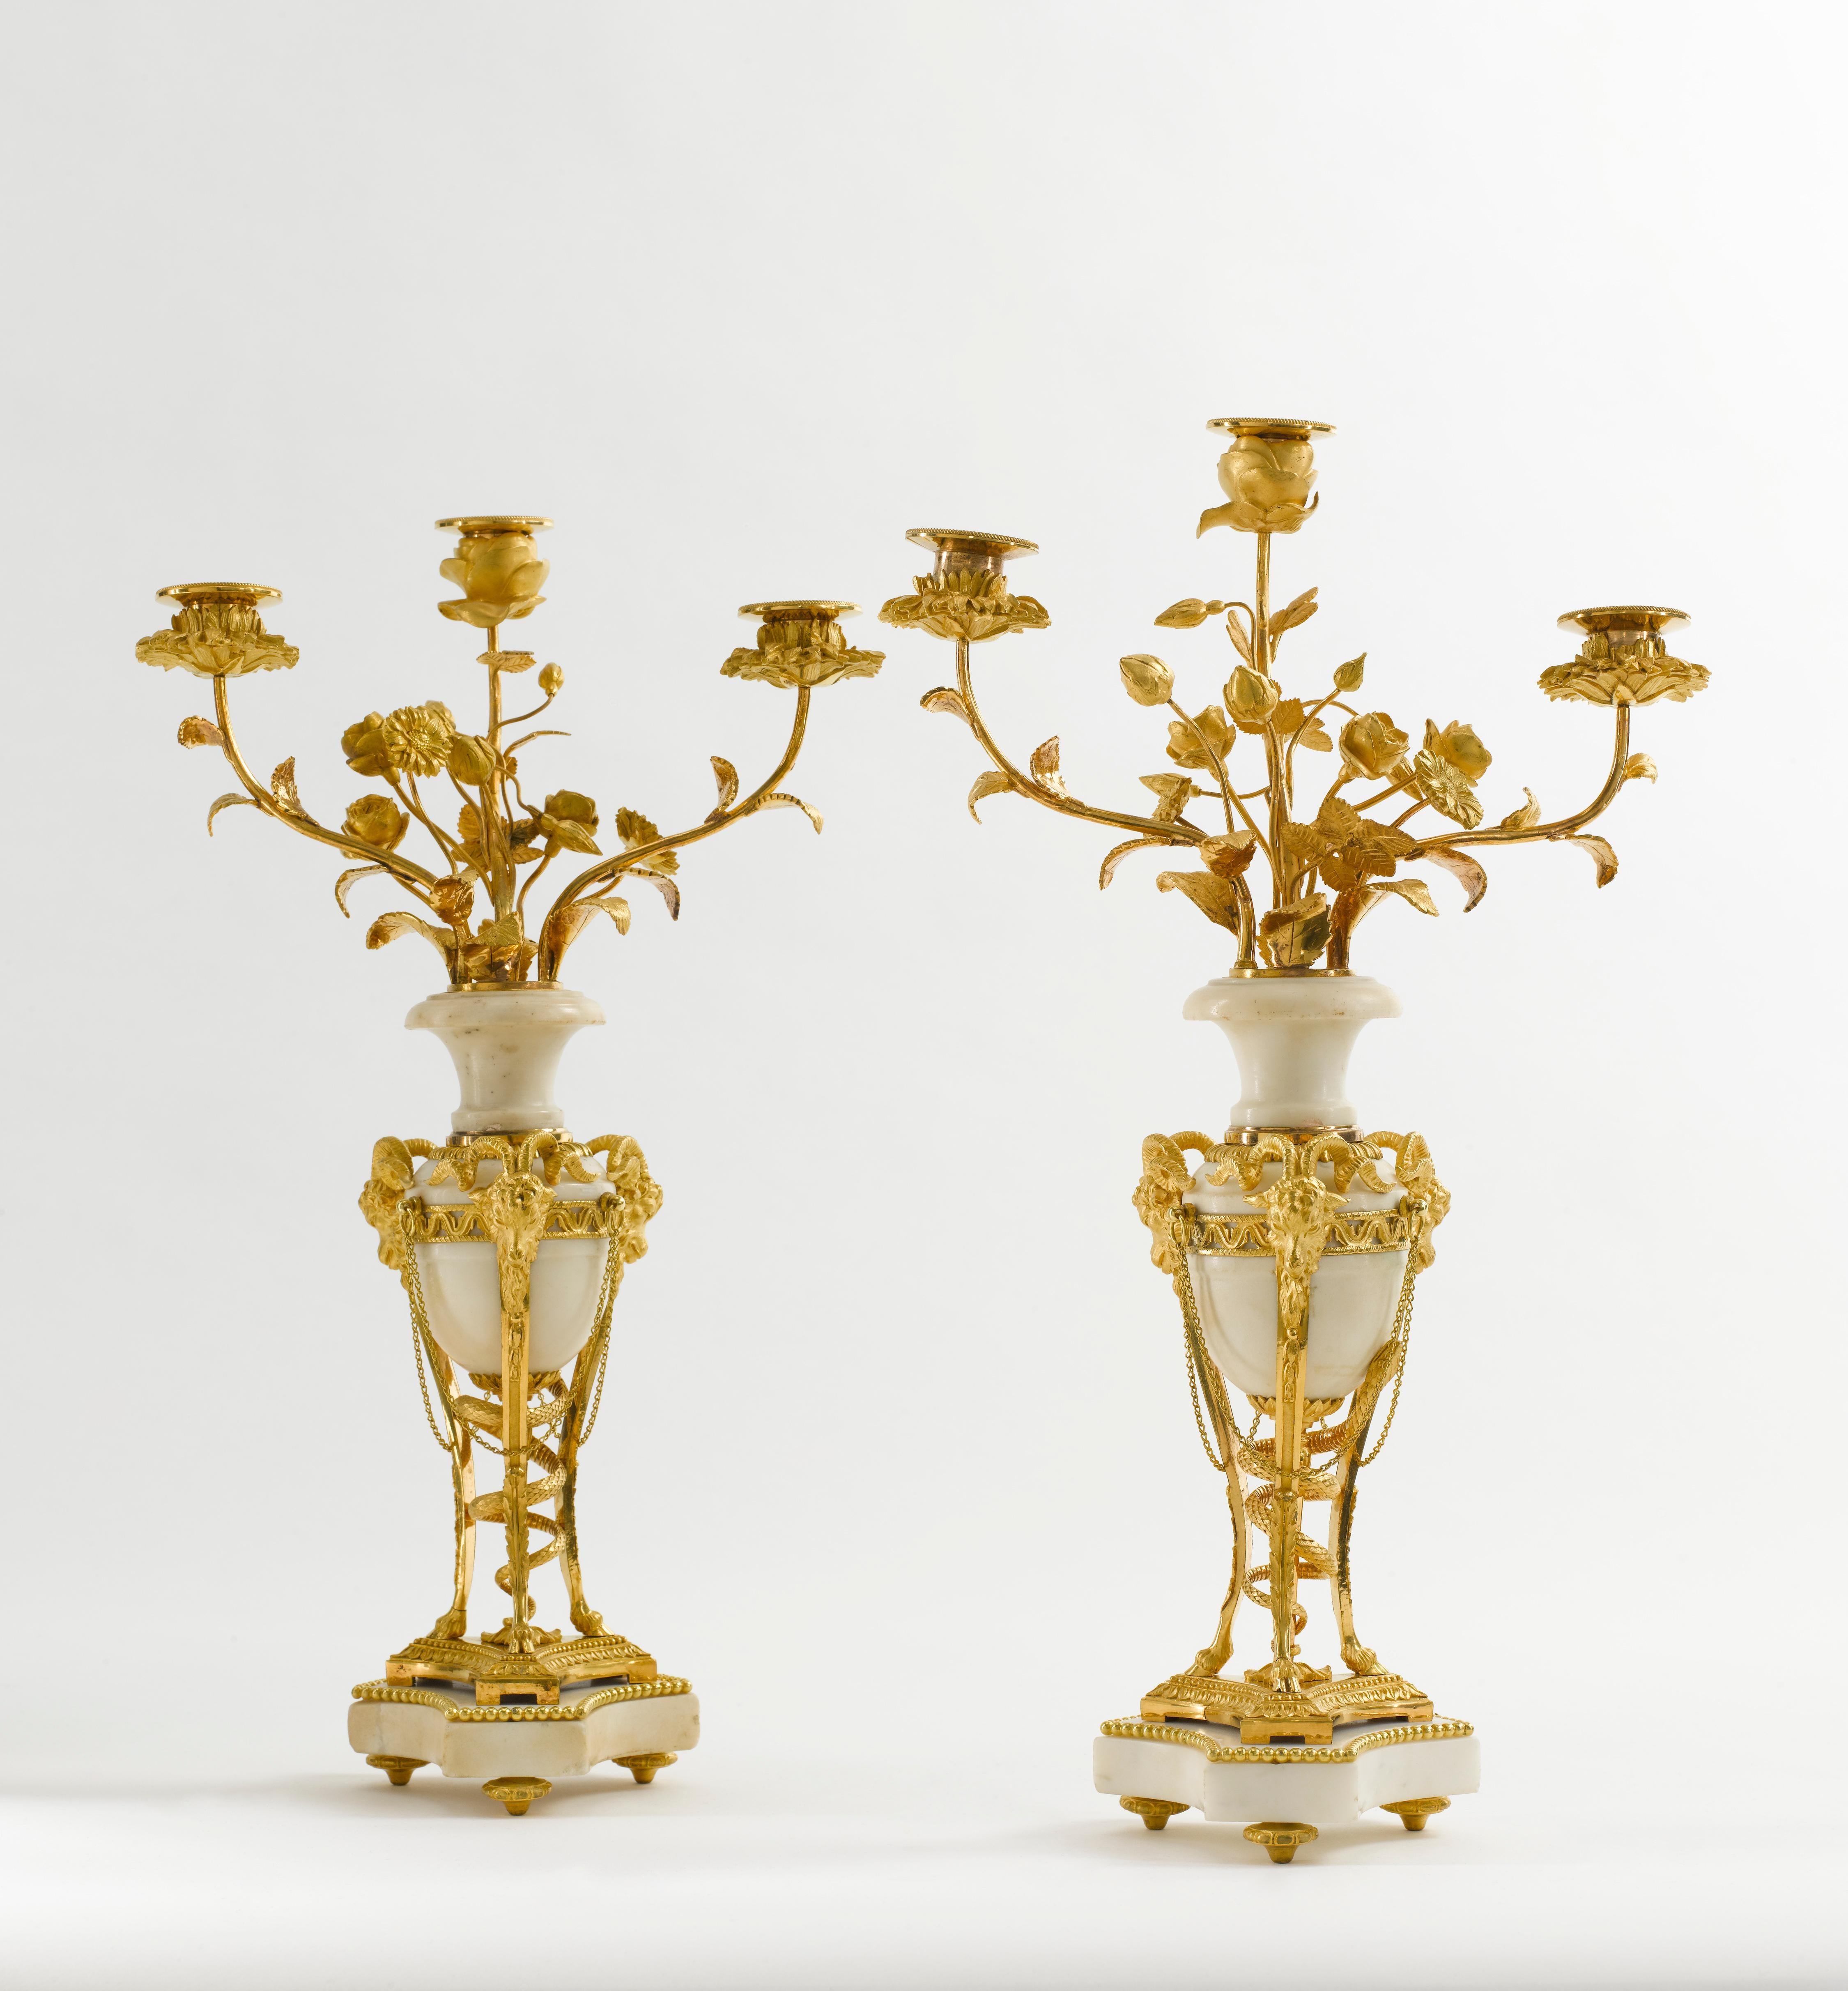 A fine pair of Louis XVI white marble and gilt bronze candelabra in the form of atheniennes. The rams-headed tripod has a snake entwined through the stem, the central ovoid form white marble body issuing three foliate branches, on toupie feet.